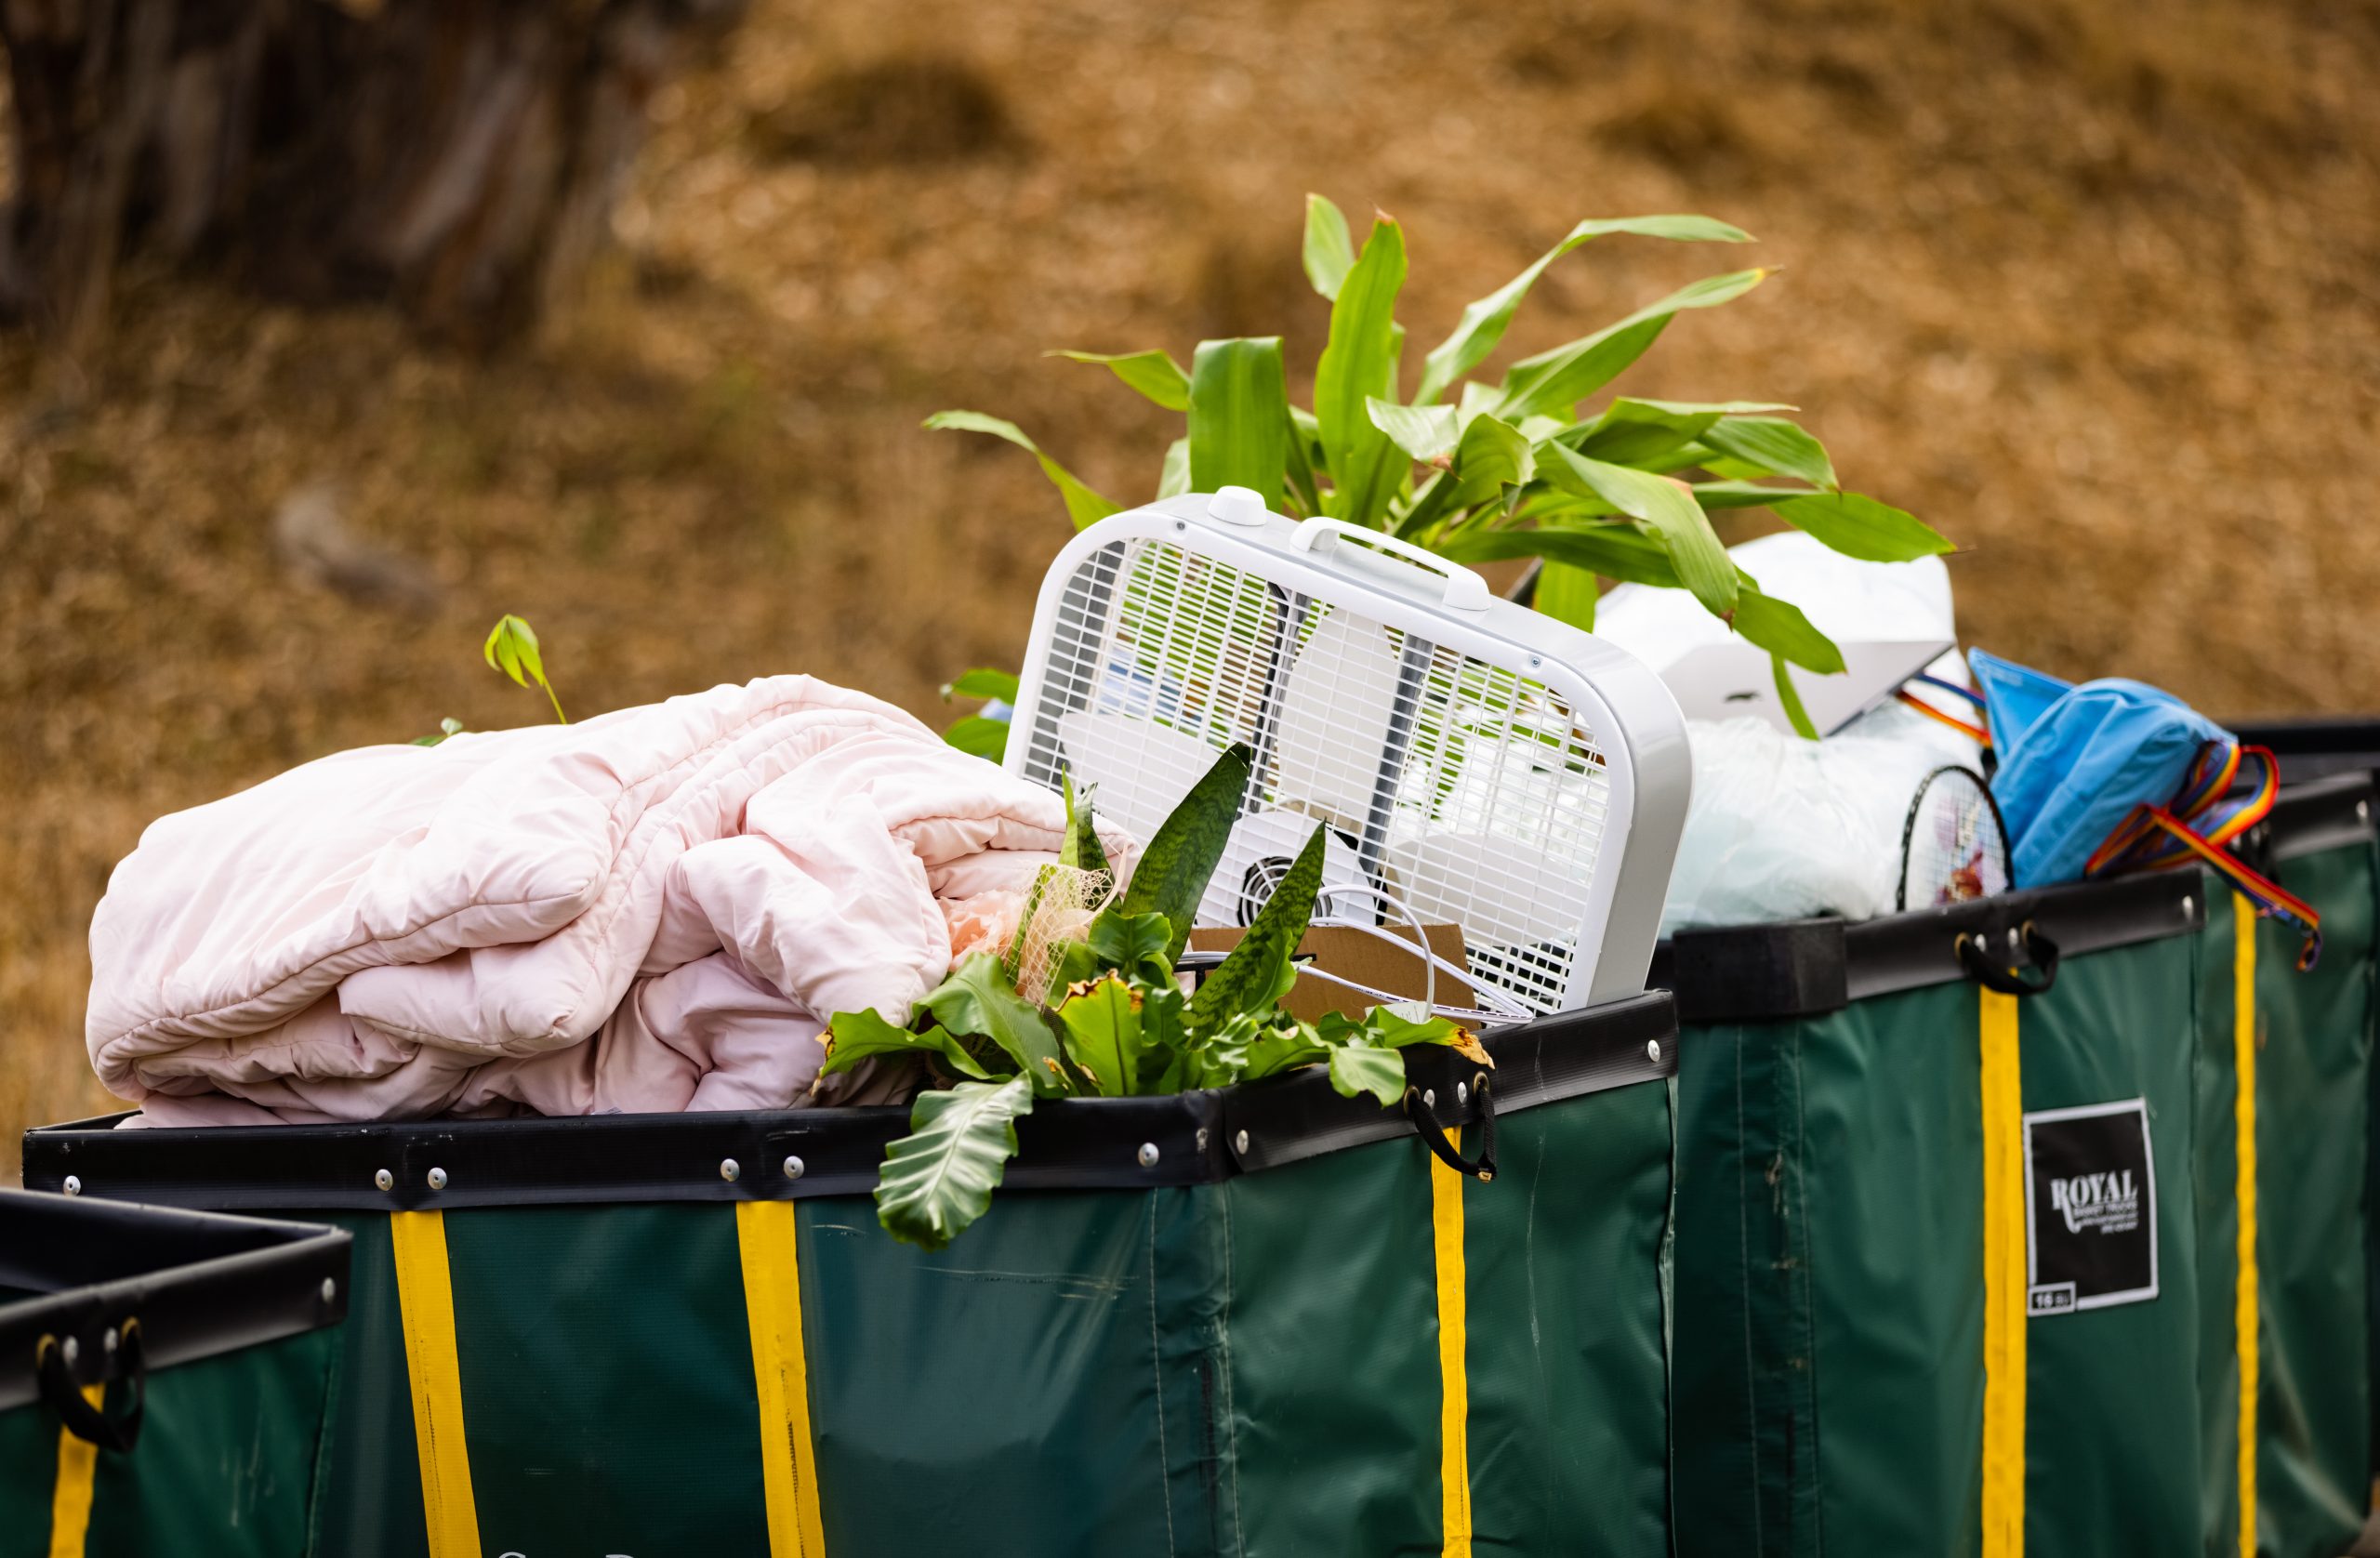 A pink blanket, a large box fan and several house plants are visible in a series of green and gold carts.